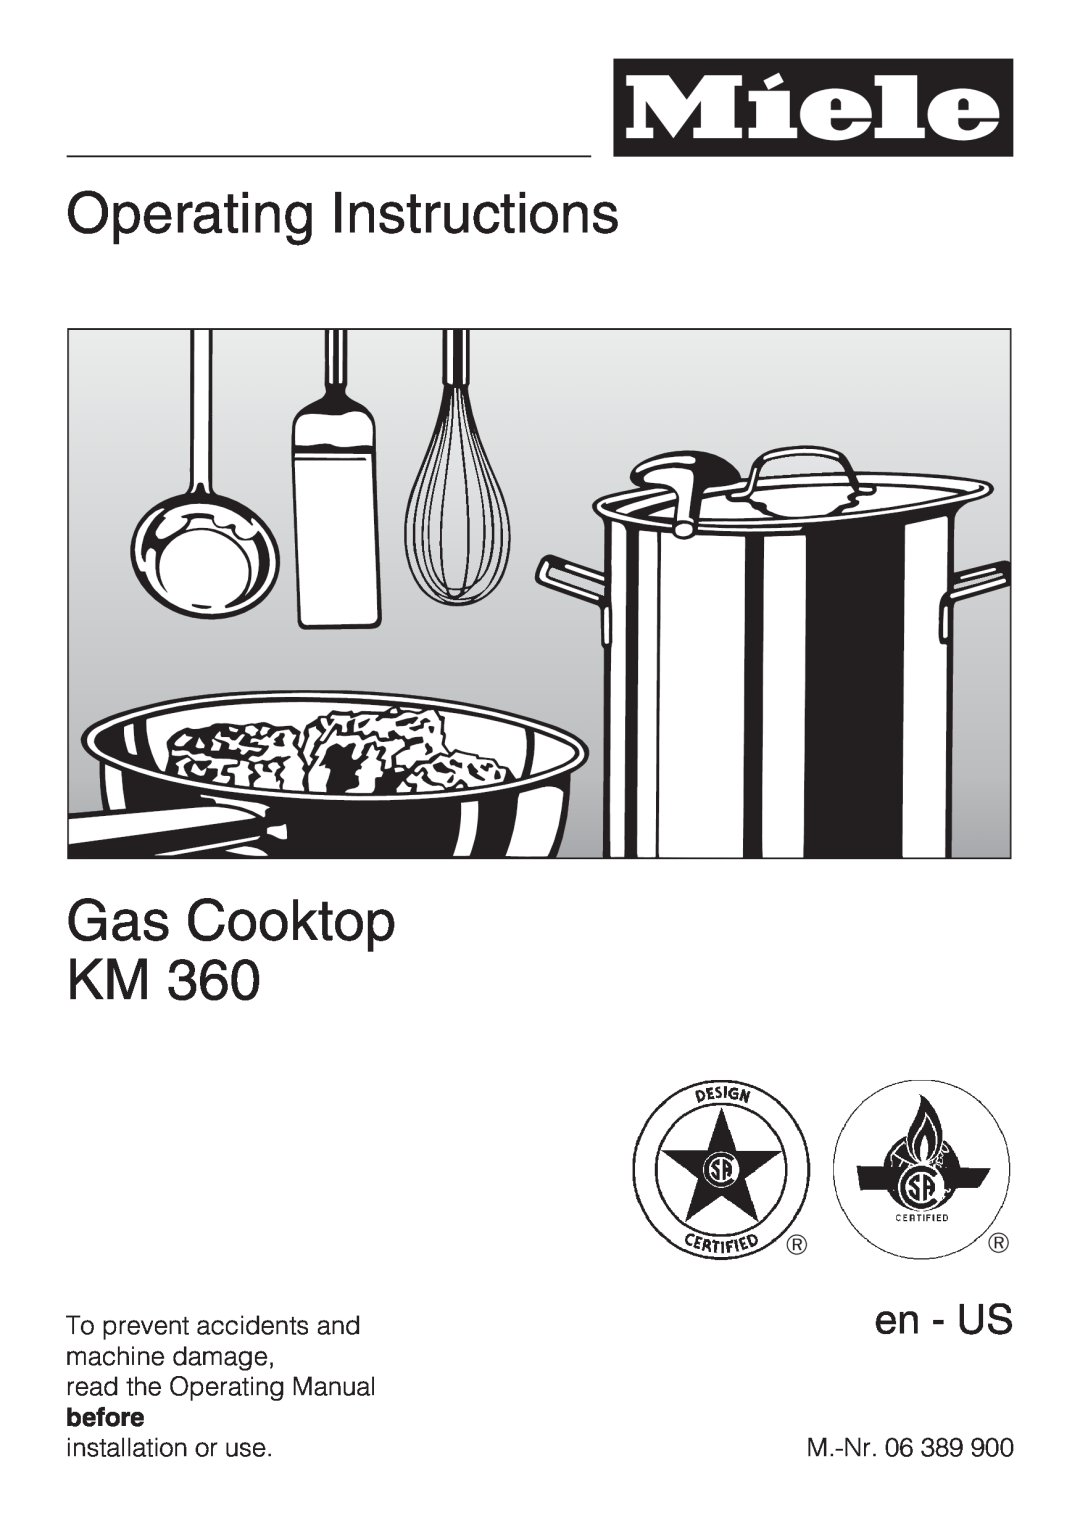 Miele KM 360 operating instructions Operating Instructions Gas Cooktop KM, en - US 